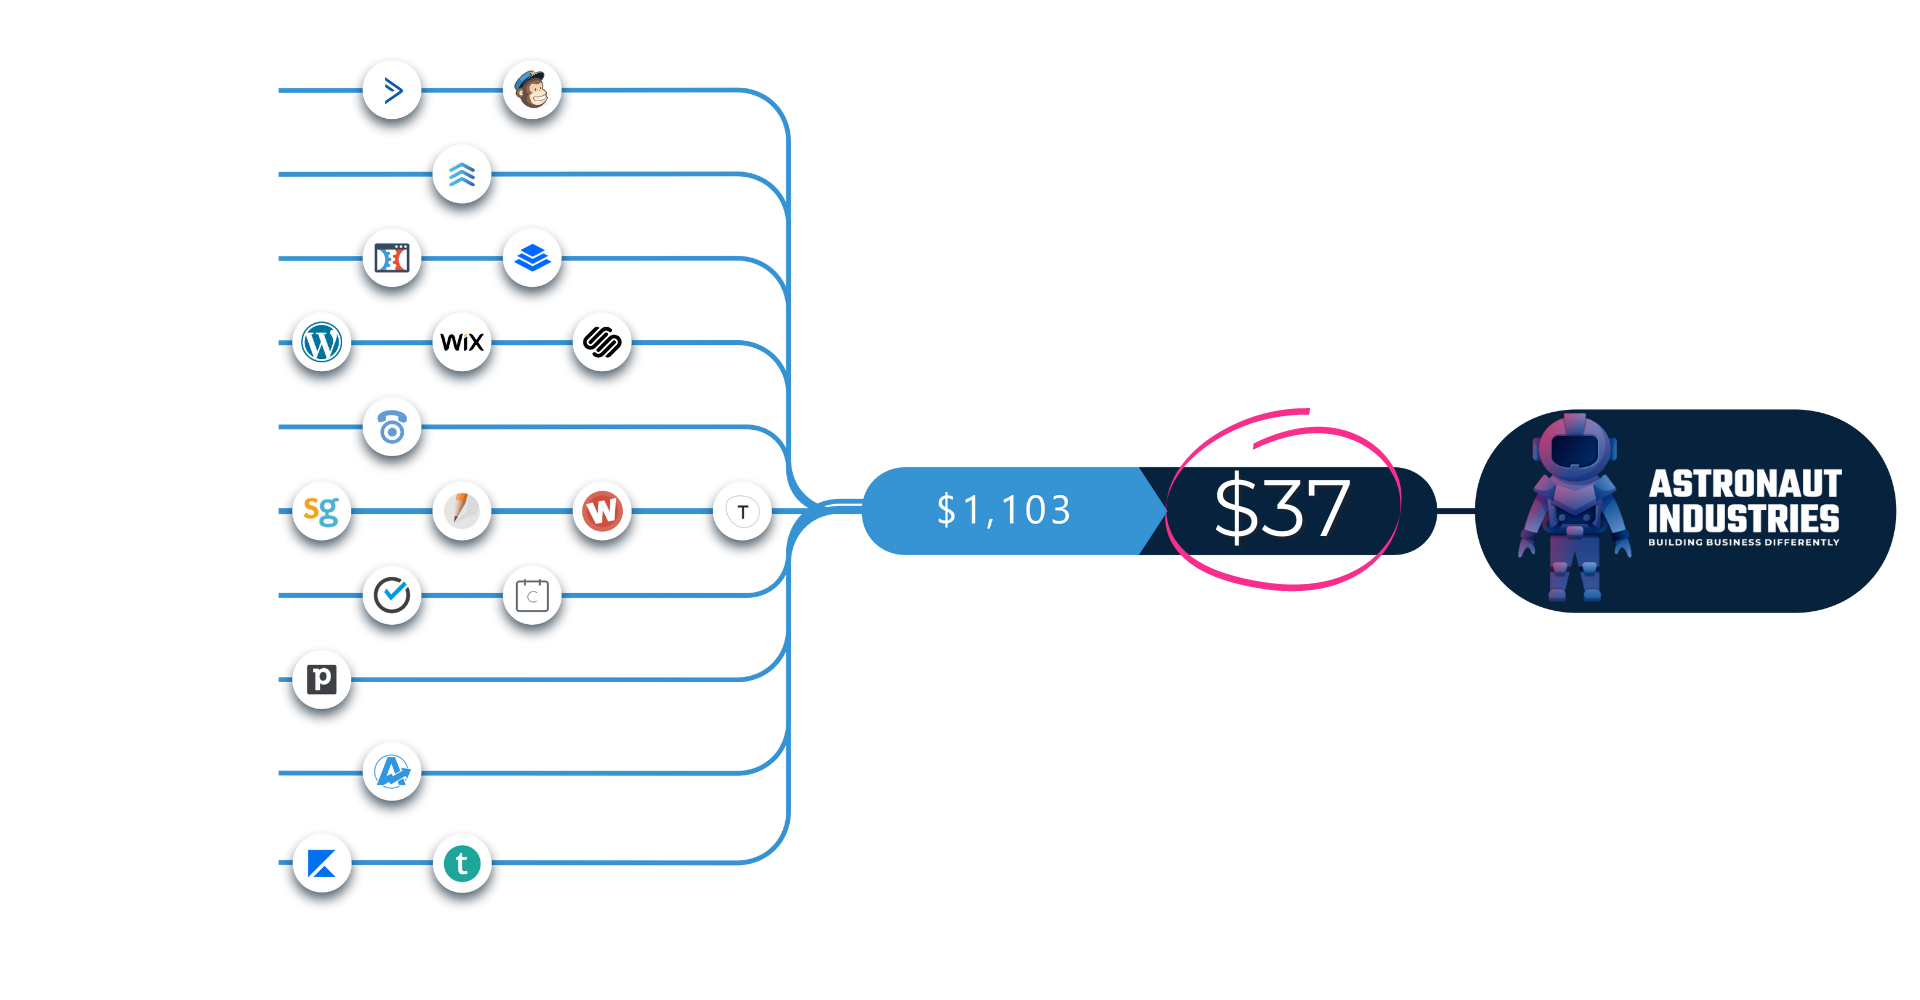 The comparison of softwares. Other software will cost you $1000's with Astronaut Industries we save you money and show you how to be successful.